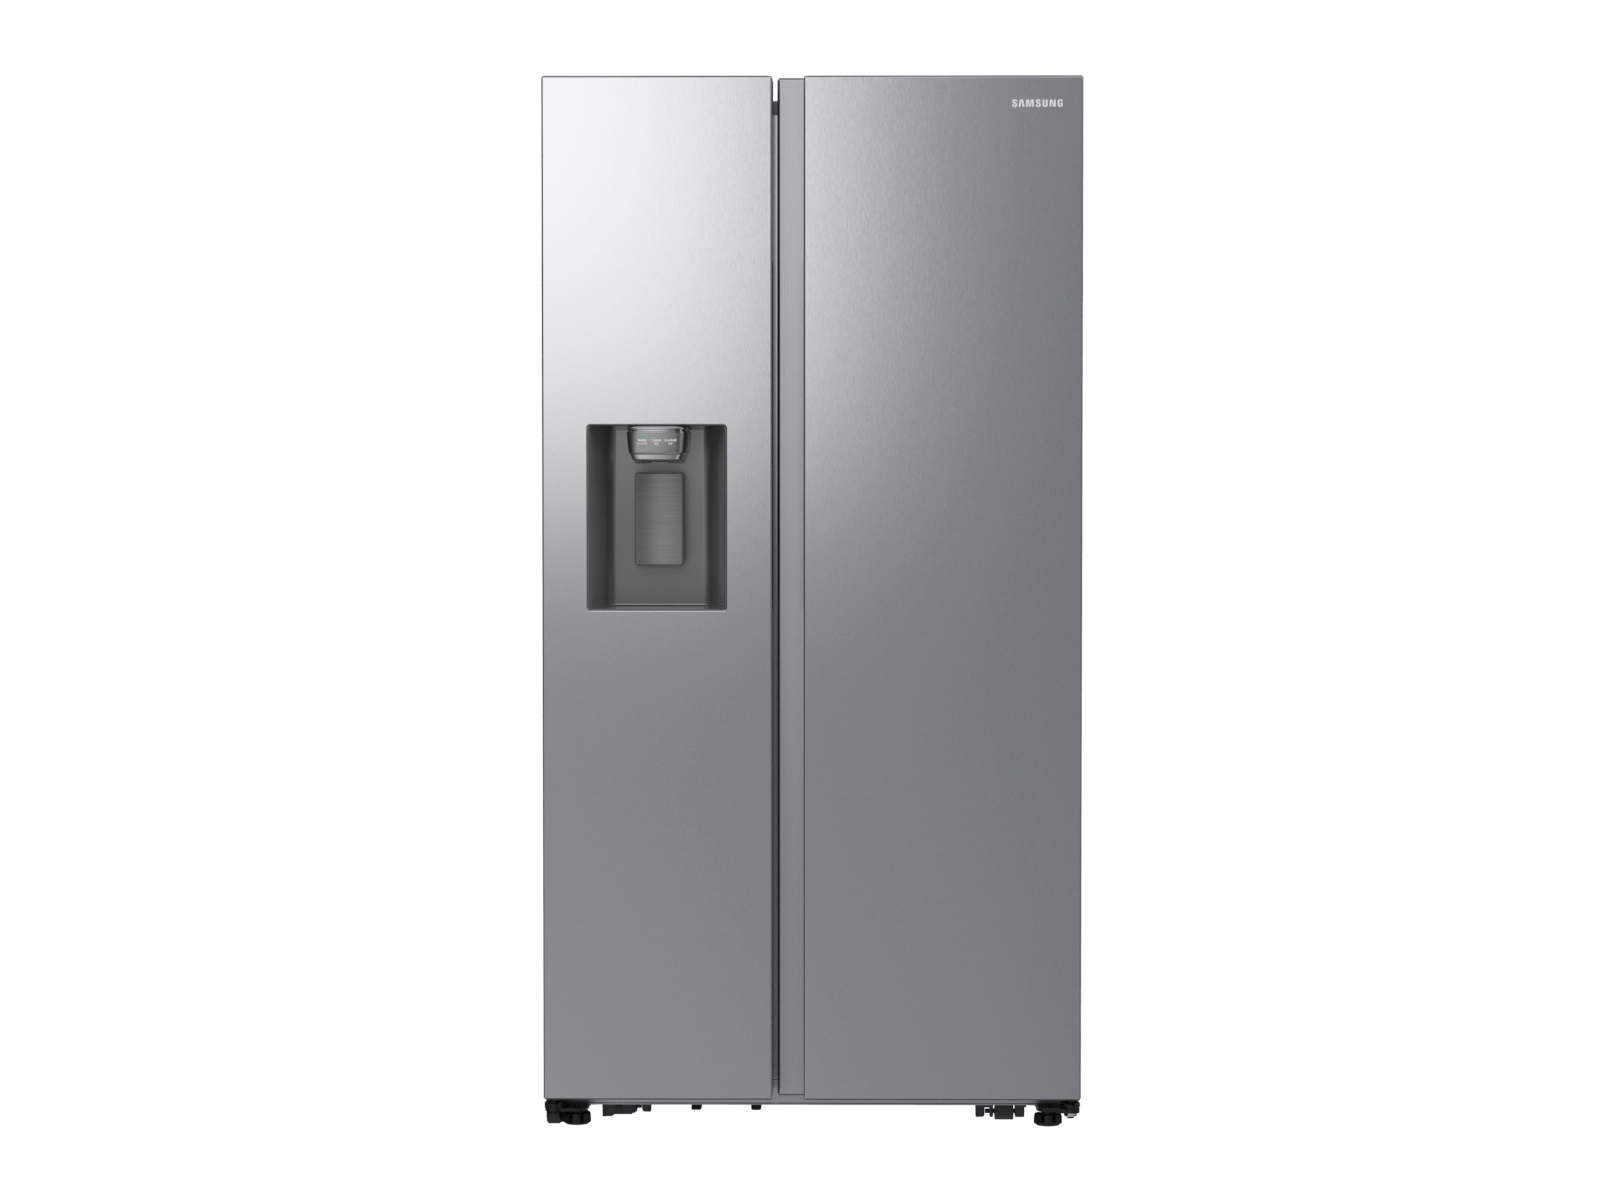 Image of Samsung RS27T5200SR refrigerator at Lowe's